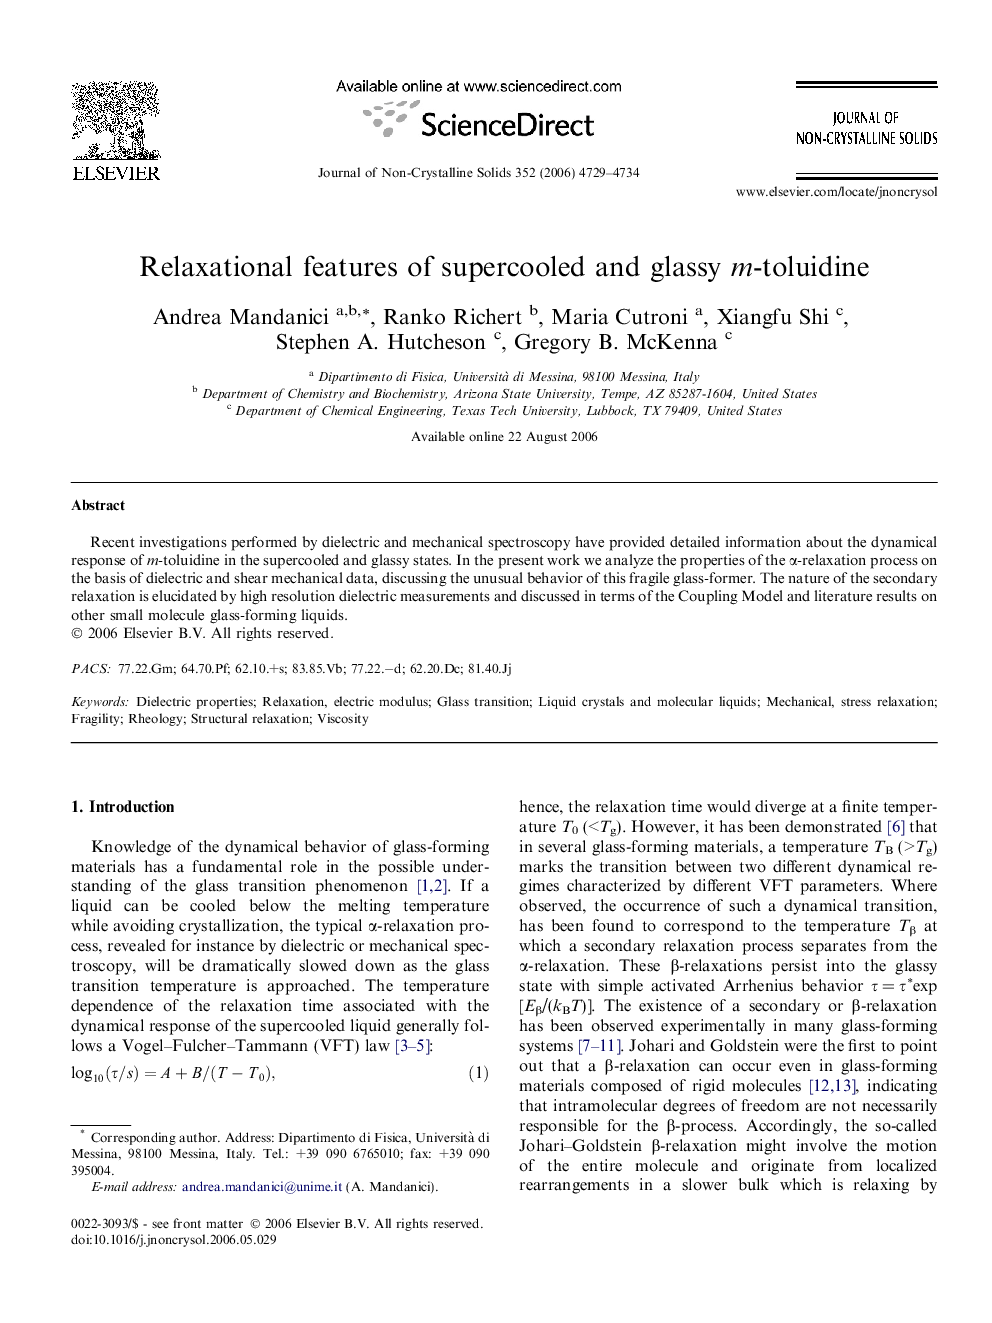 Relaxational features of supercooled and glassy m-toluidine